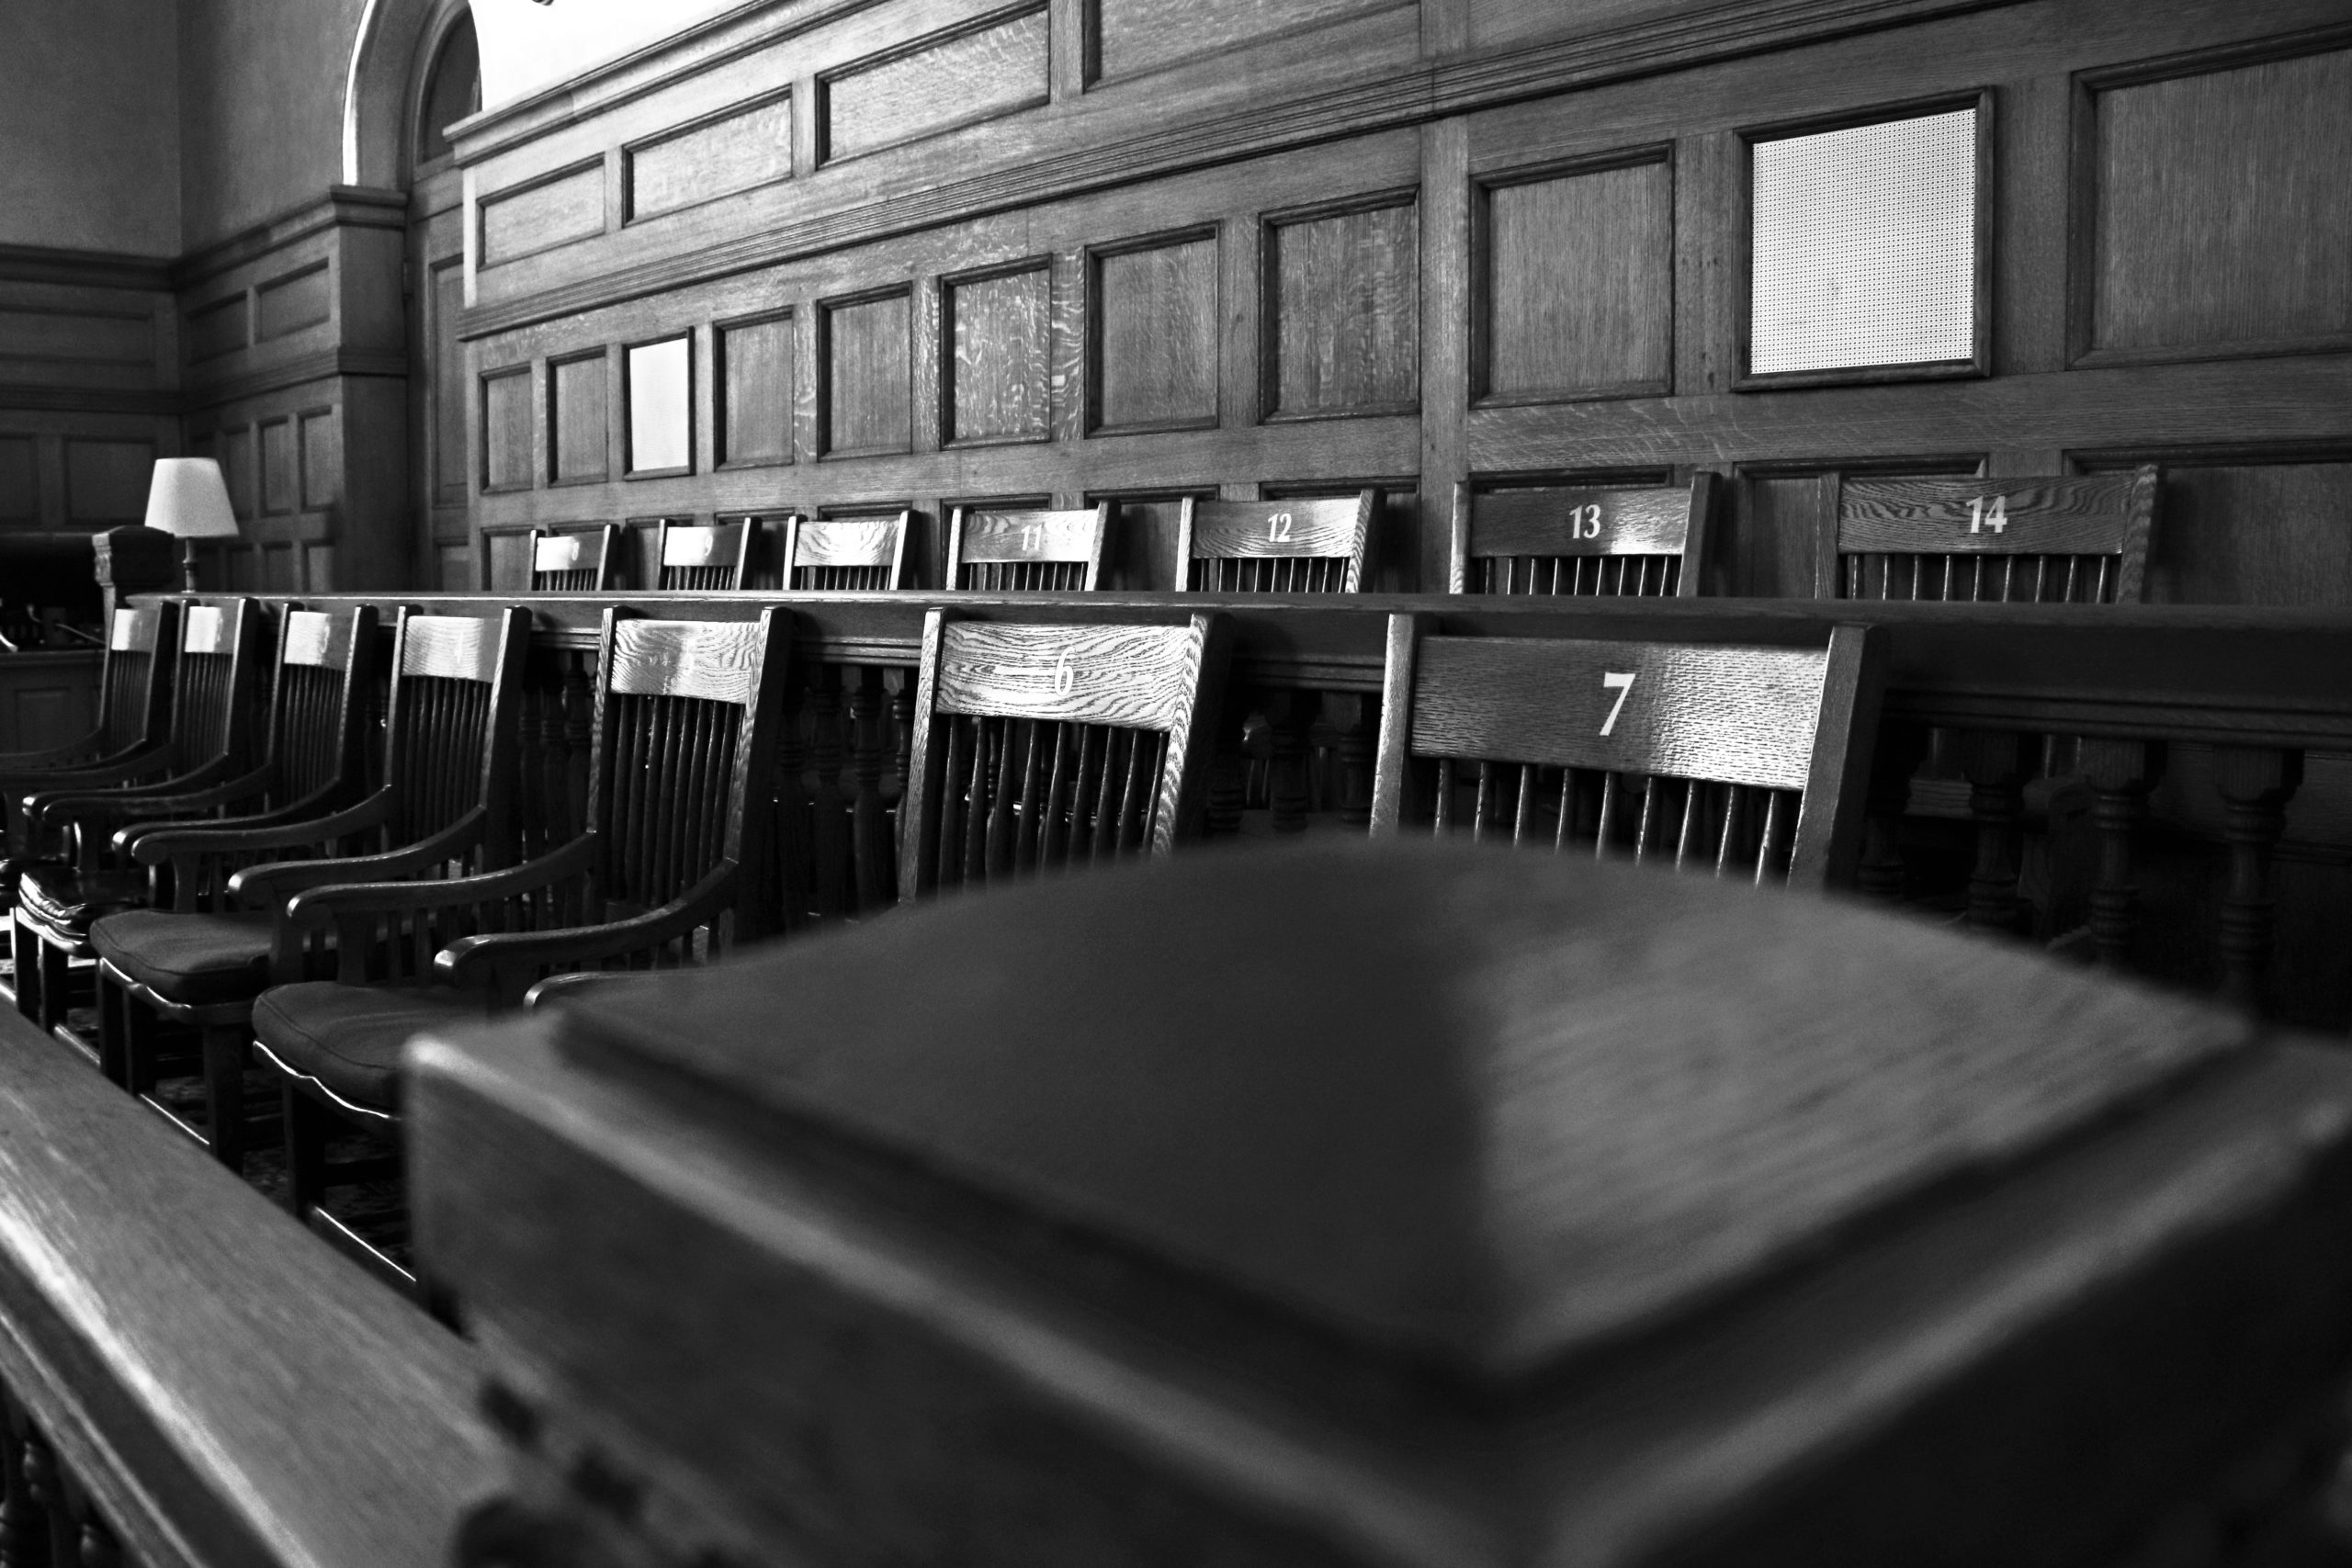 jury box ,courtroom black and white